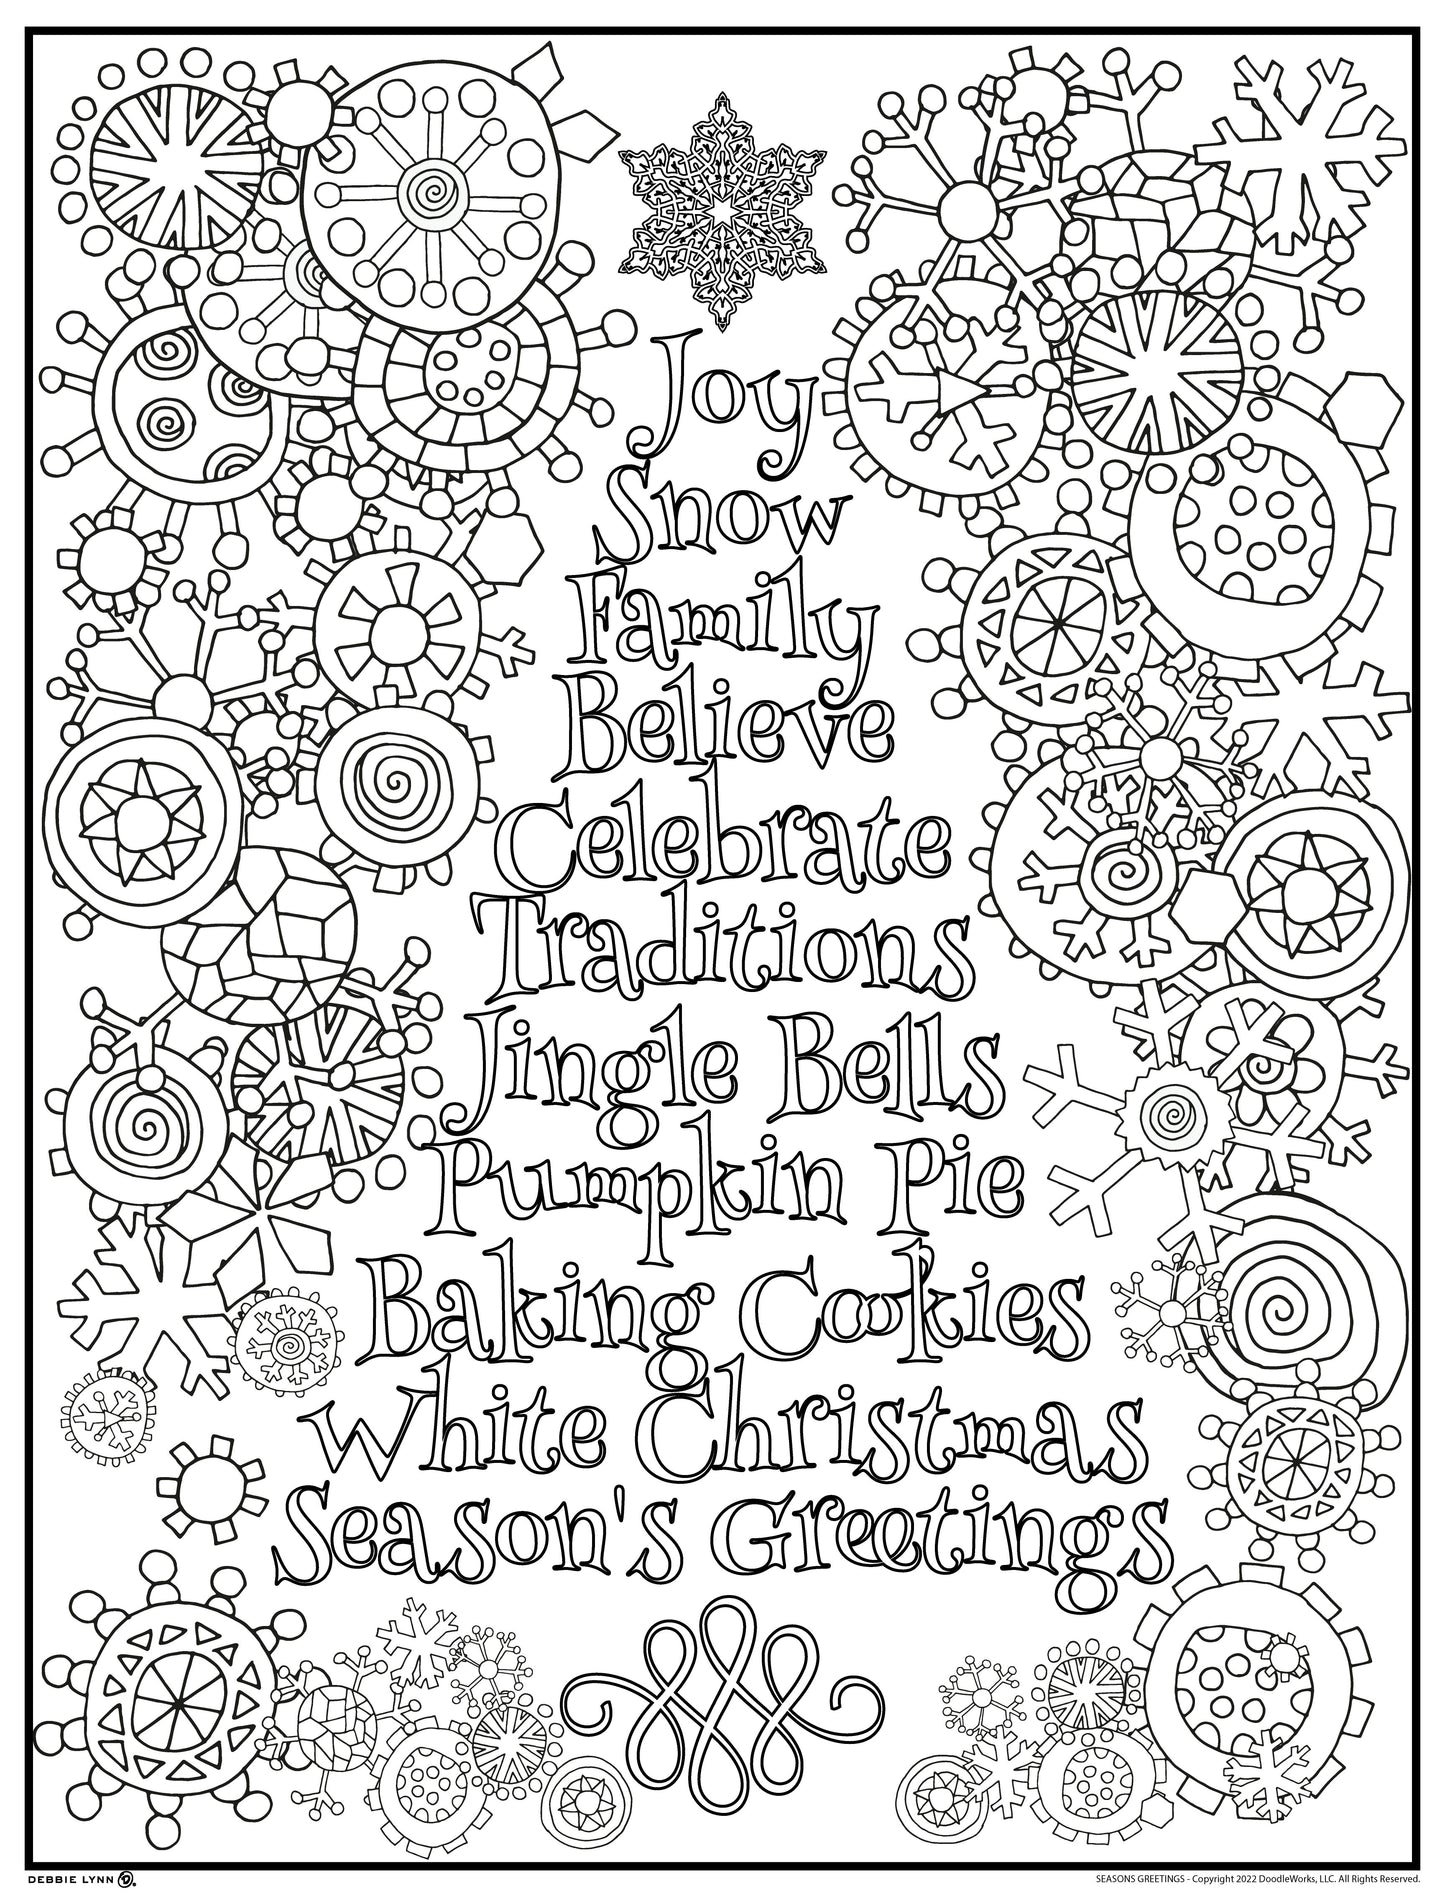 Seasons Greetings Personalized Giant Coloring Poster 46"x60"